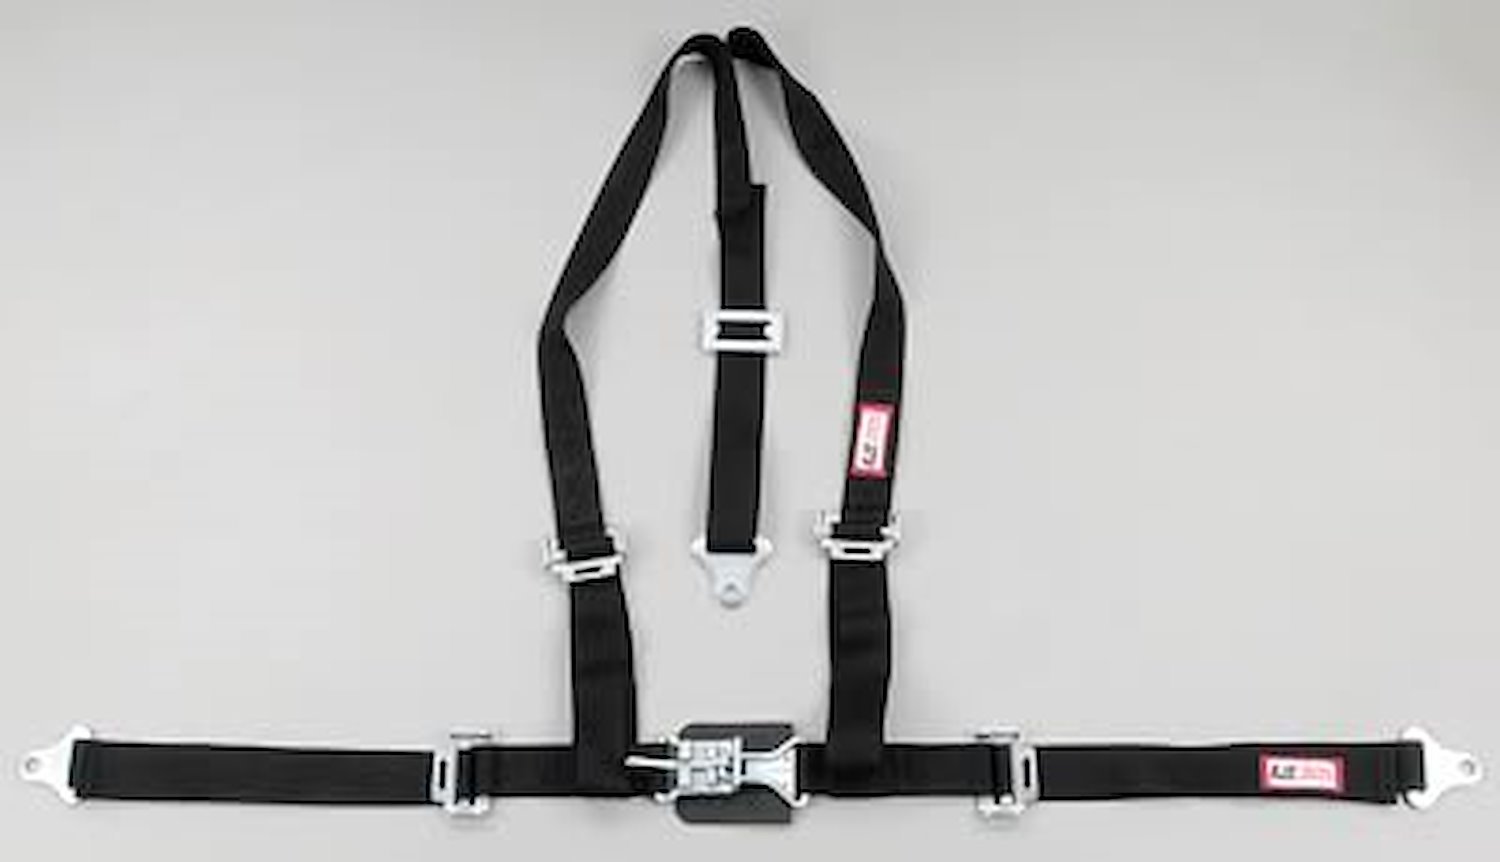 NON-SFI L&L HARNESS 3 PULL UP Lap BELT SNAP SEWN IN 2 S.H. Y FLOOR Mount w/STERNUM STRAP WRAP/SNAP BLACK